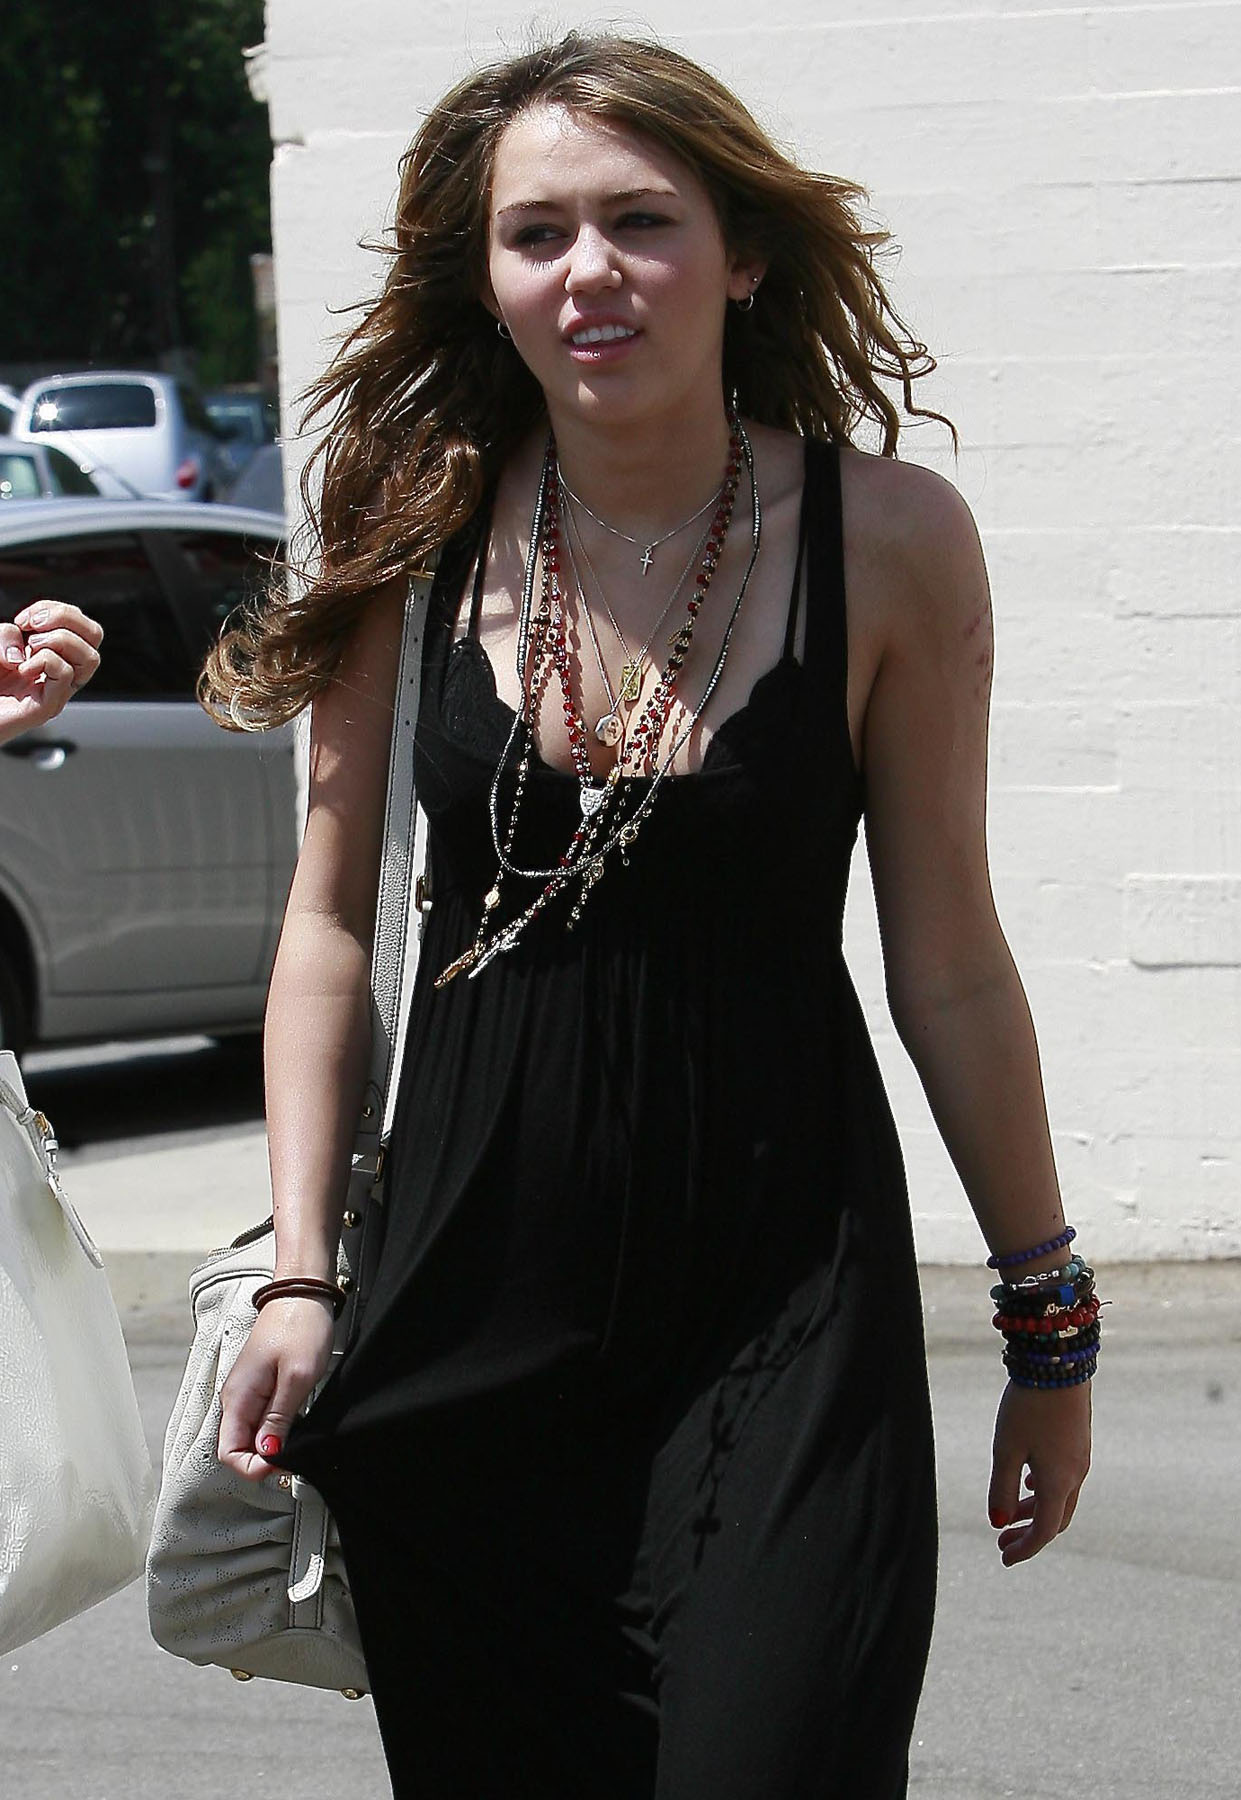 Miley-Cyrus-20090831_Out-n-About-Studio-City_May09_11981.jpg